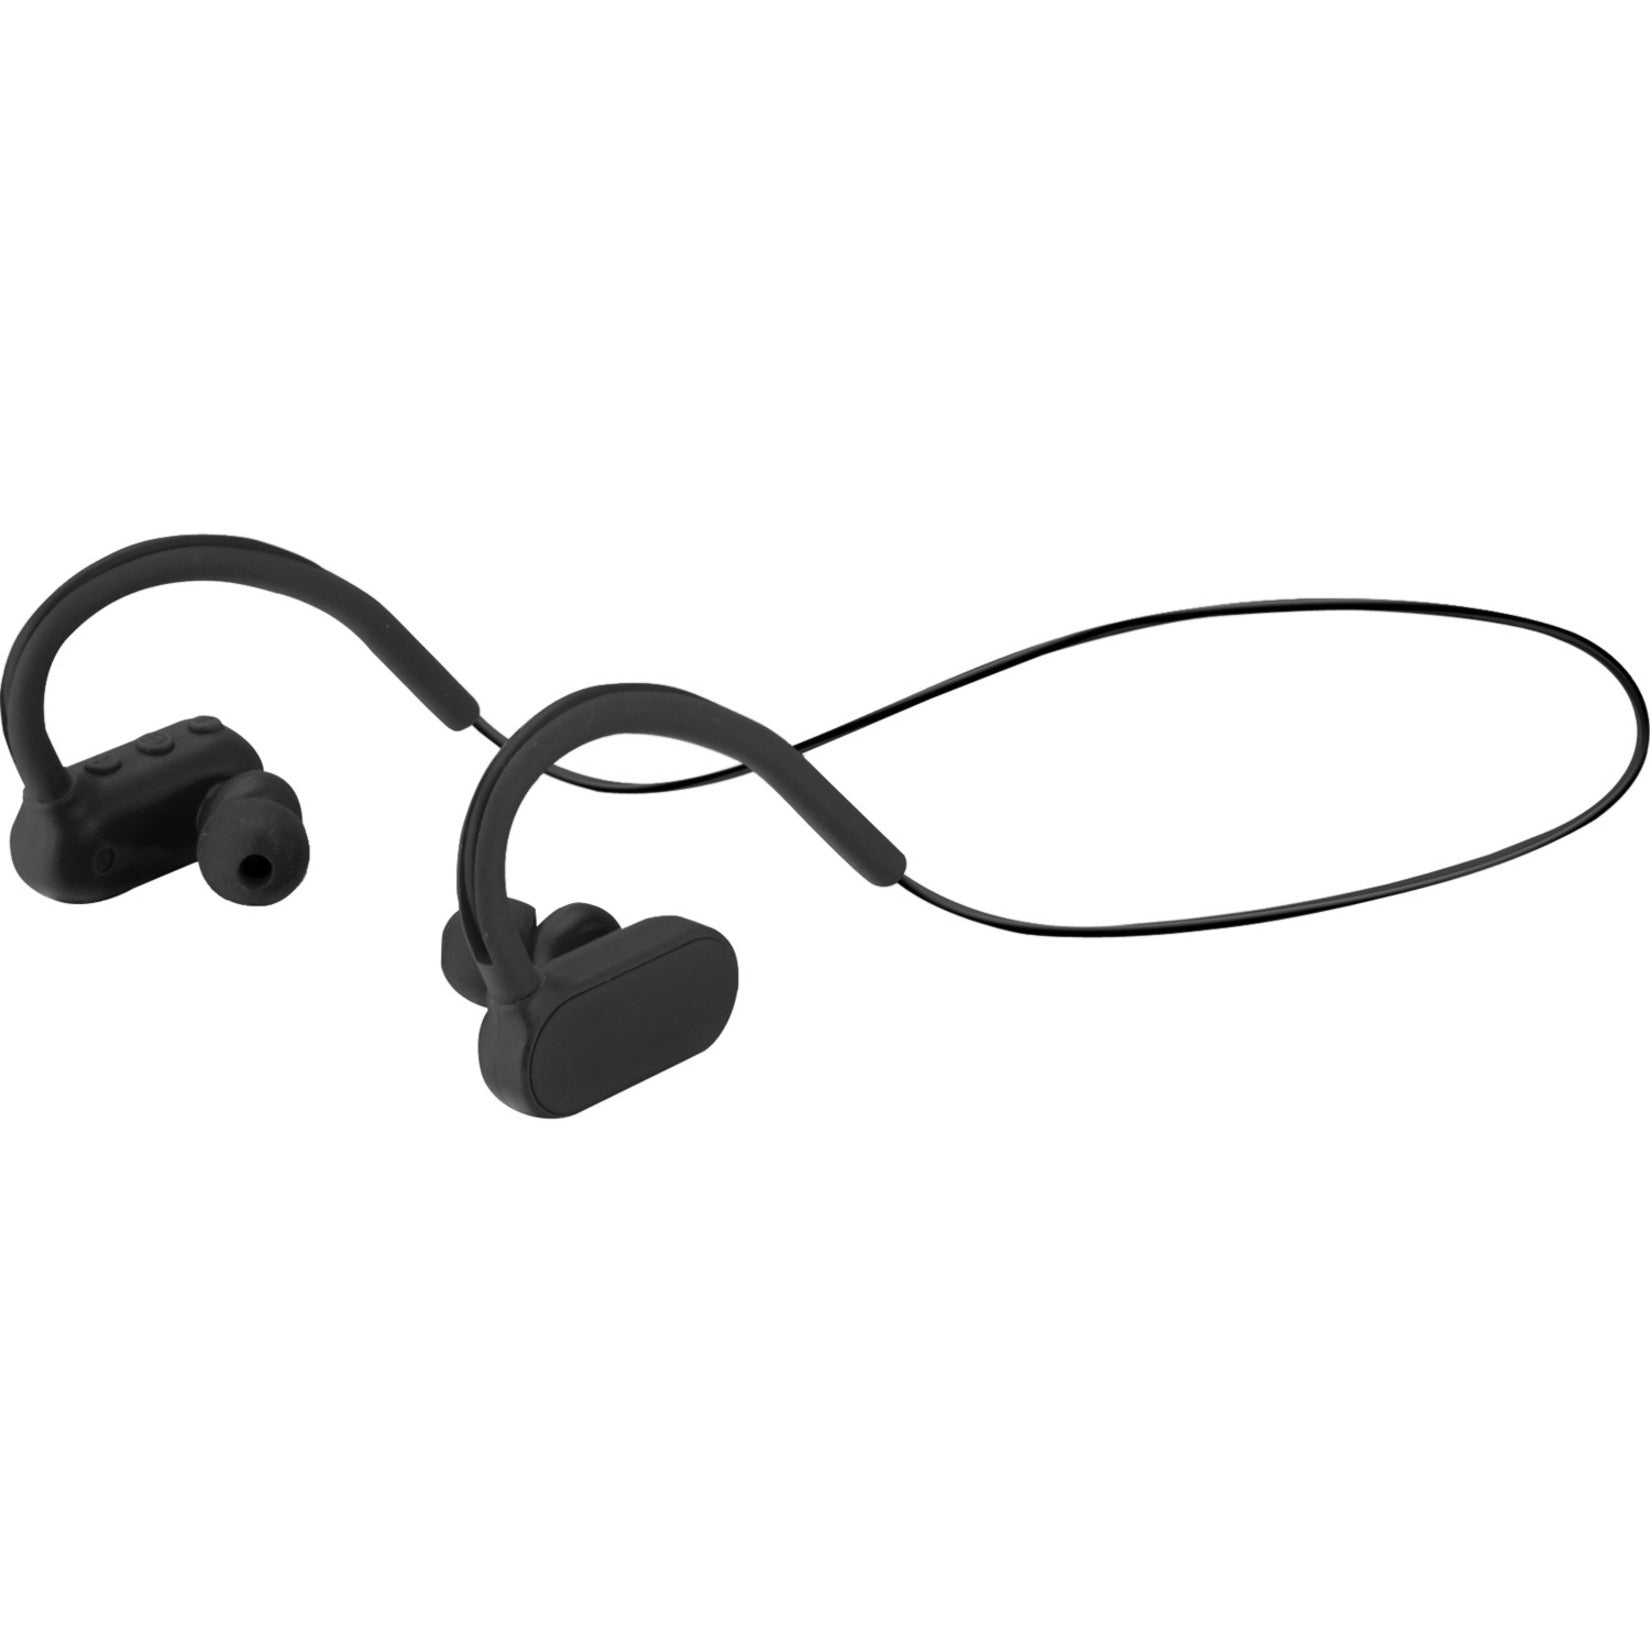 iLive IAEB29B Earset, Wireless Bluetooth Stereo Earset with Over-the-ear, Earbud, Behind-the-neck Design